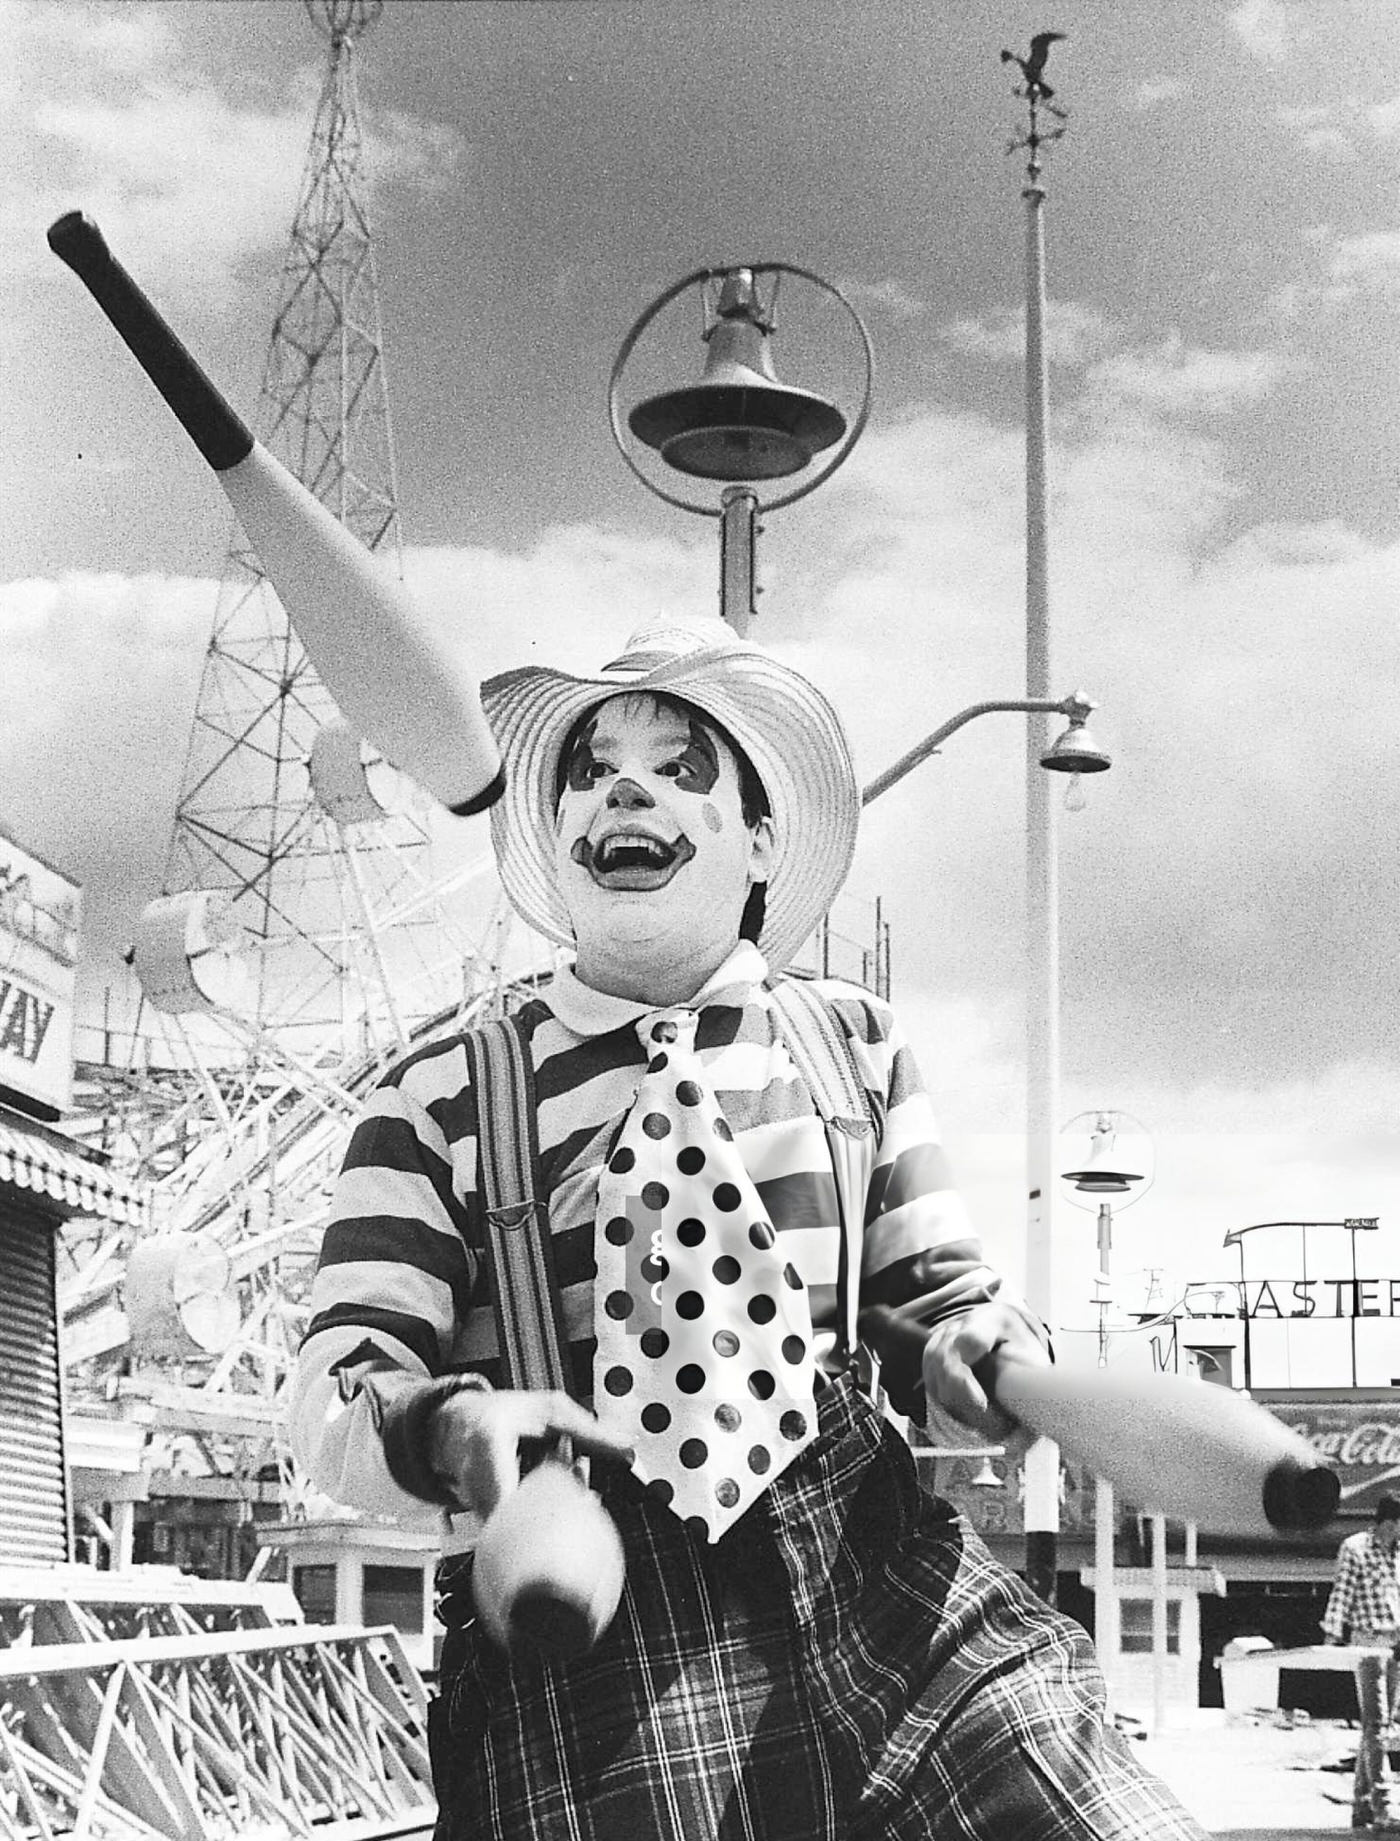 Josh Herman, &Amp;Quot;Smiling Josh The Clown&Amp;Quot;, Practices Juggling For The Season'S Grand Opening Of Rockaways' Playland In Queens, 1984.